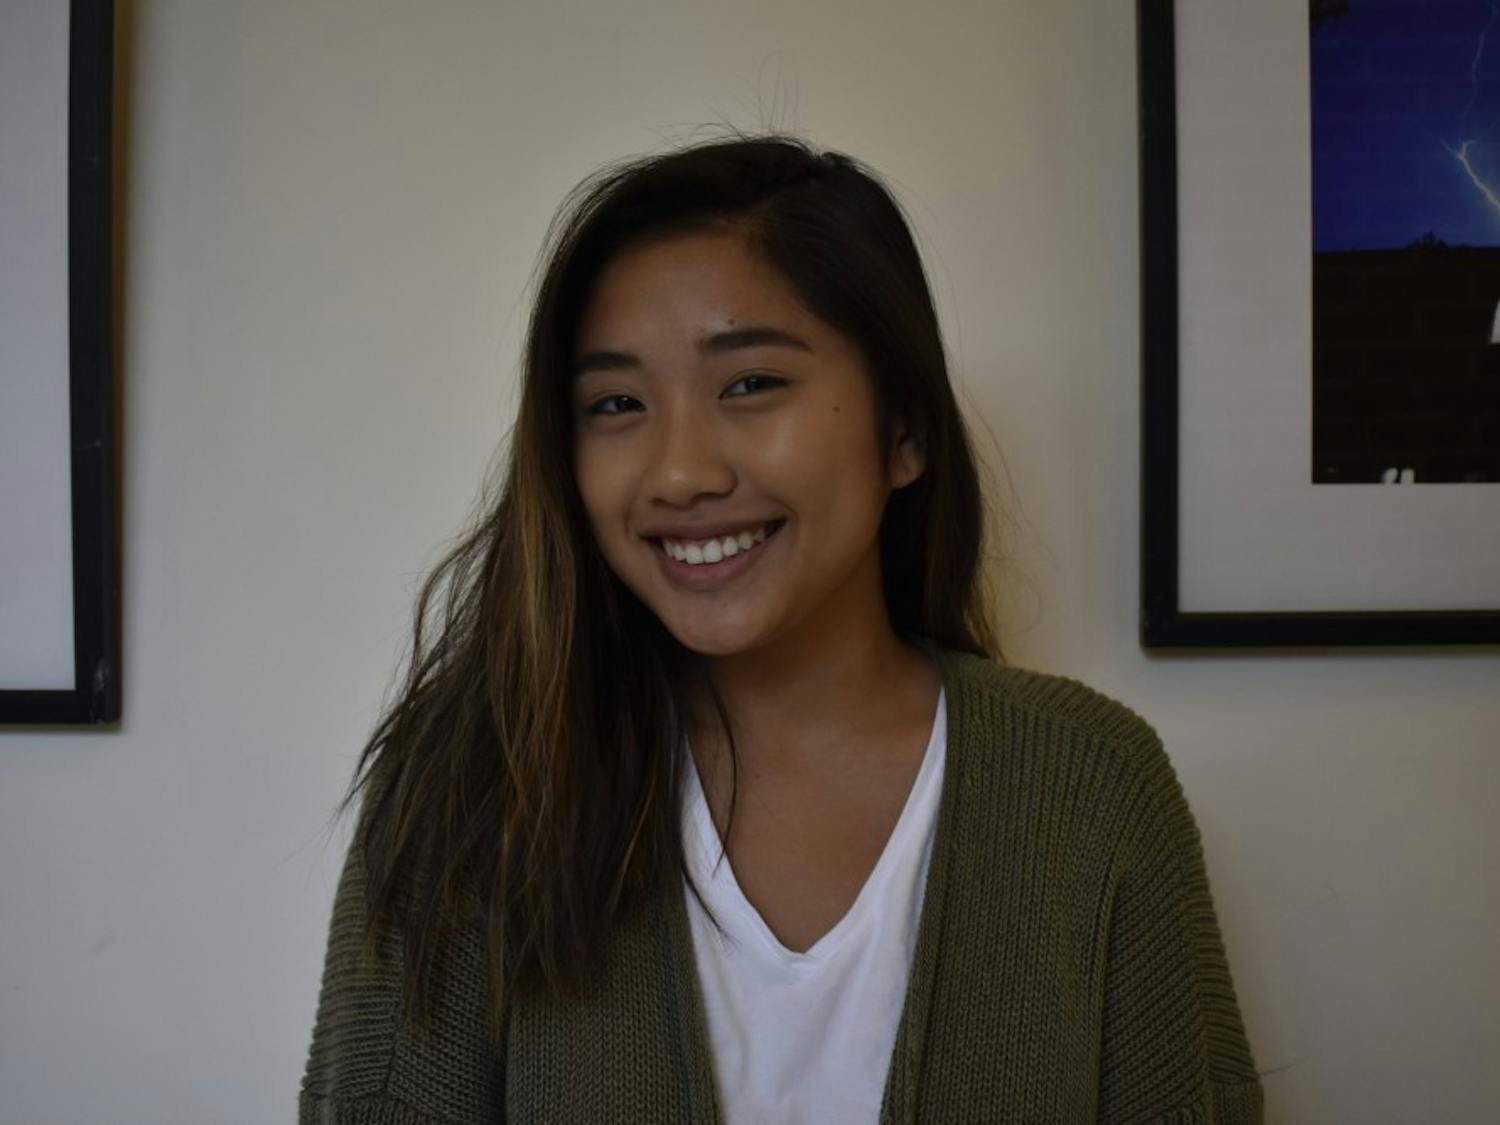 Tran Nguyen is a first-year student at UNC.